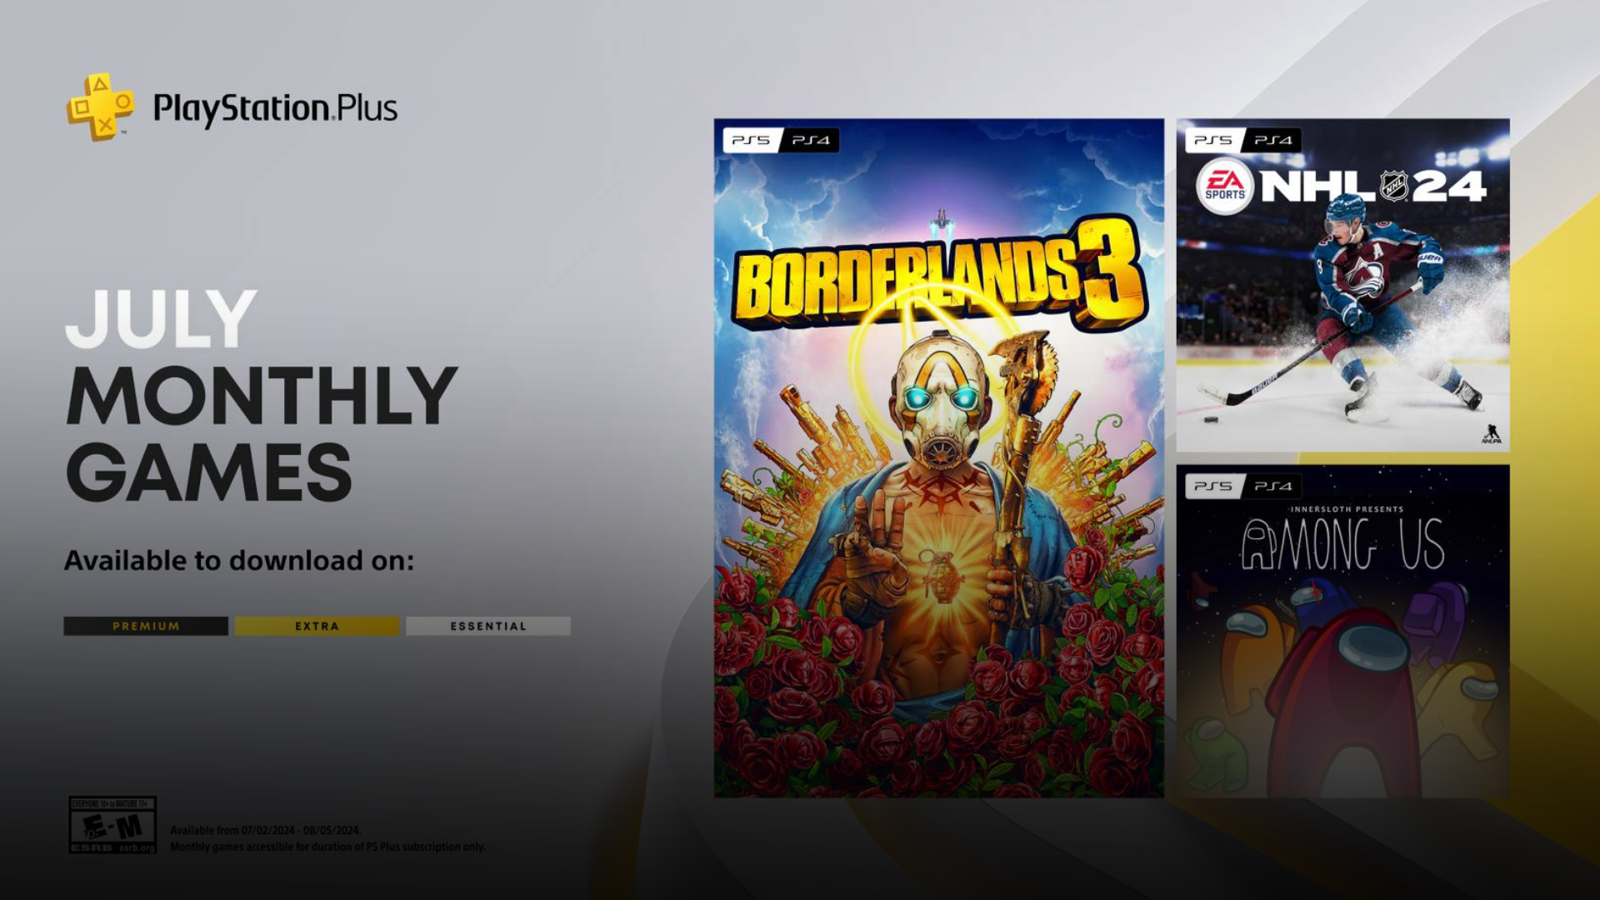 “New month new trash”: PS Plus Announces July 2024 Games and Disappoints Once Again